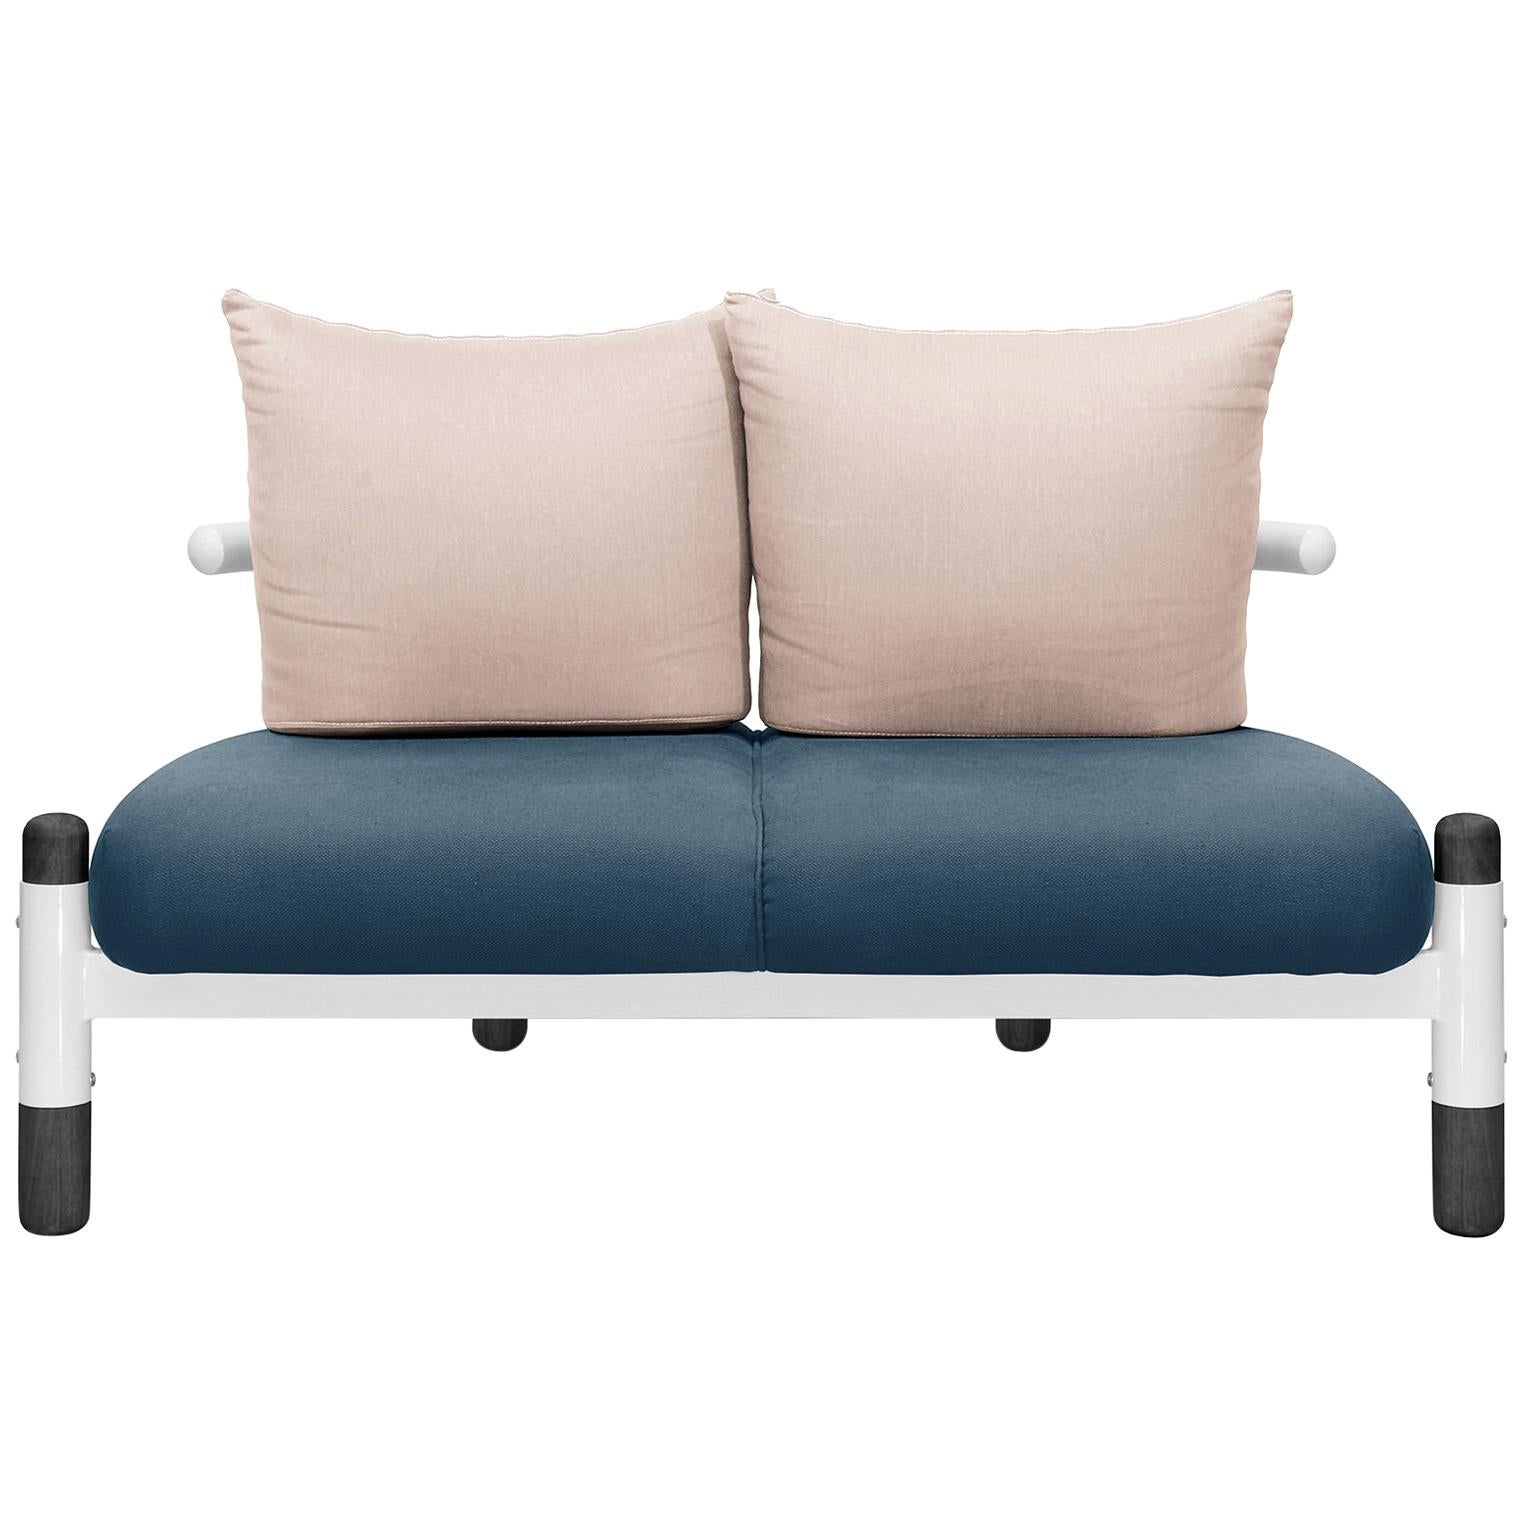 Blue PK15 Two-Seat Sofa, Steel Structure and Ebonized Wood Legs by Paulo Kobylka For Sale